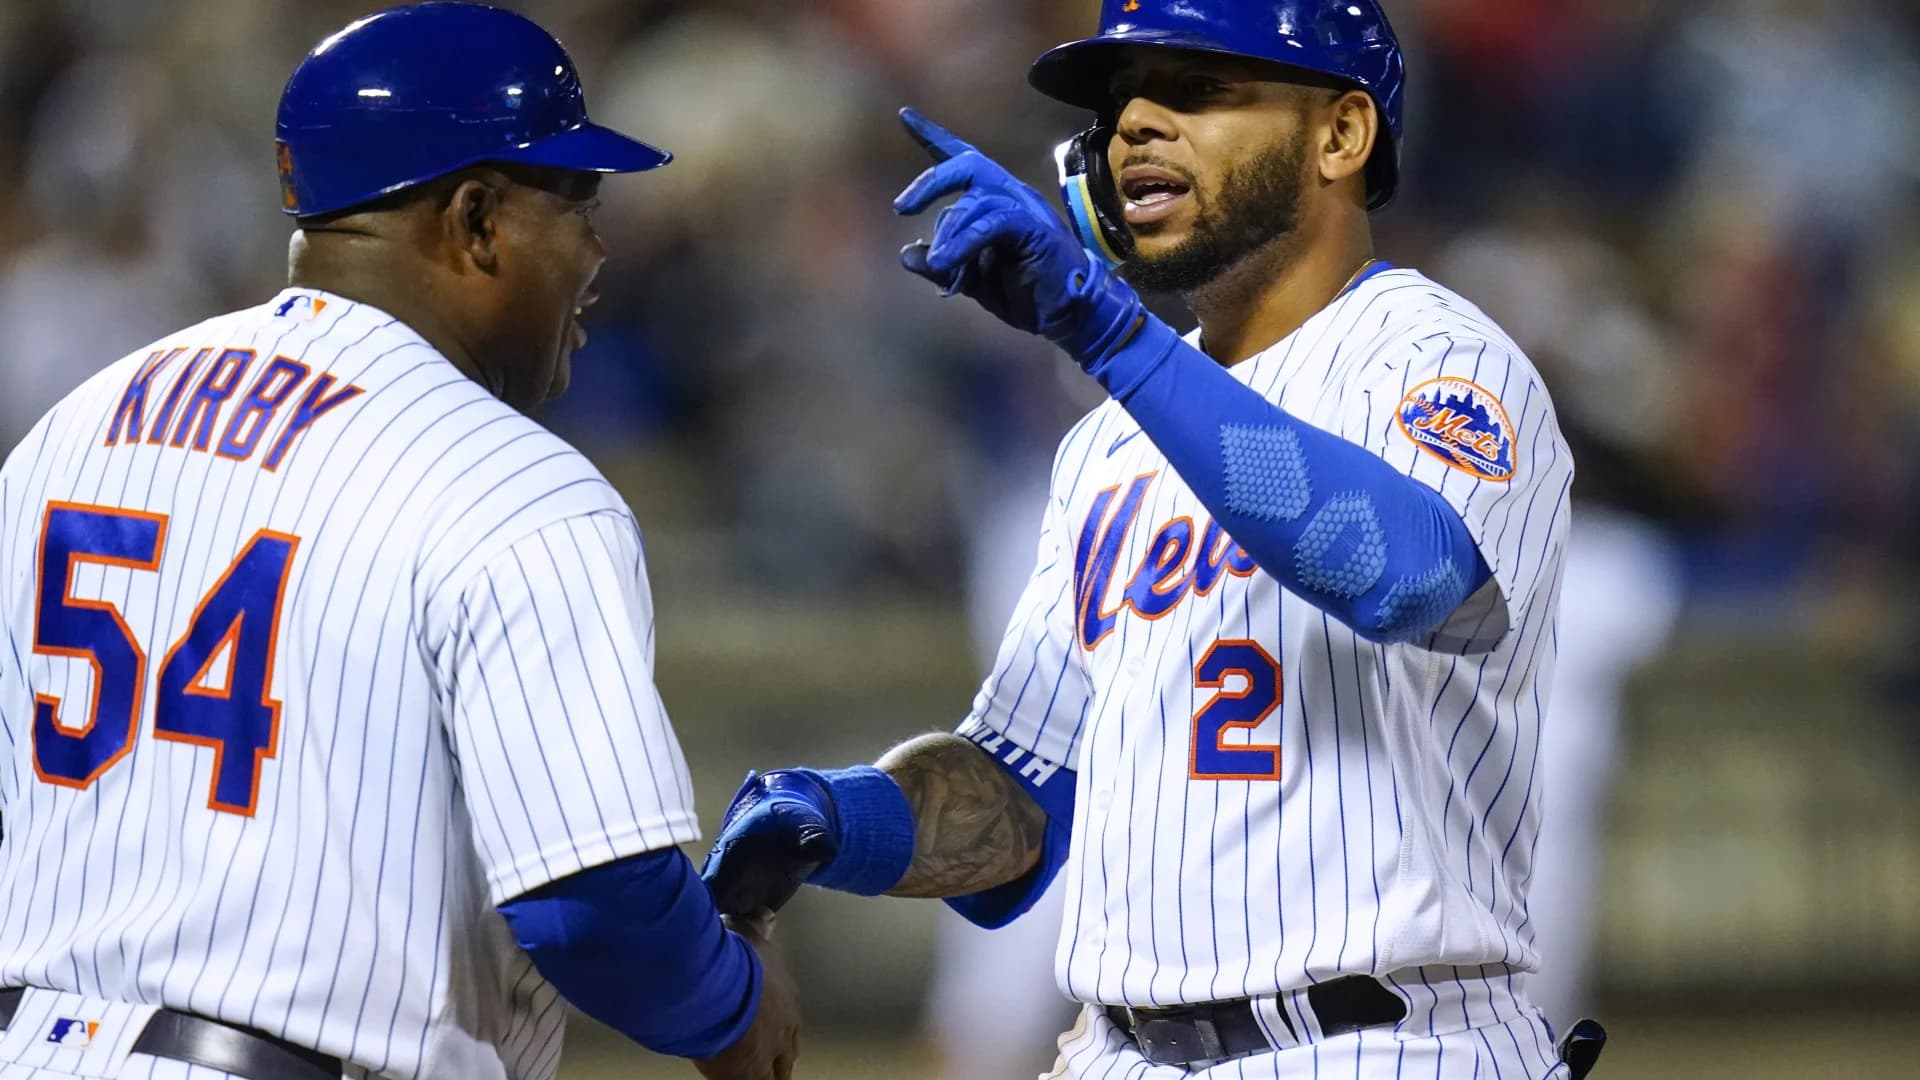 Mets recall Dom Smith from Triple-A after 3-week stint